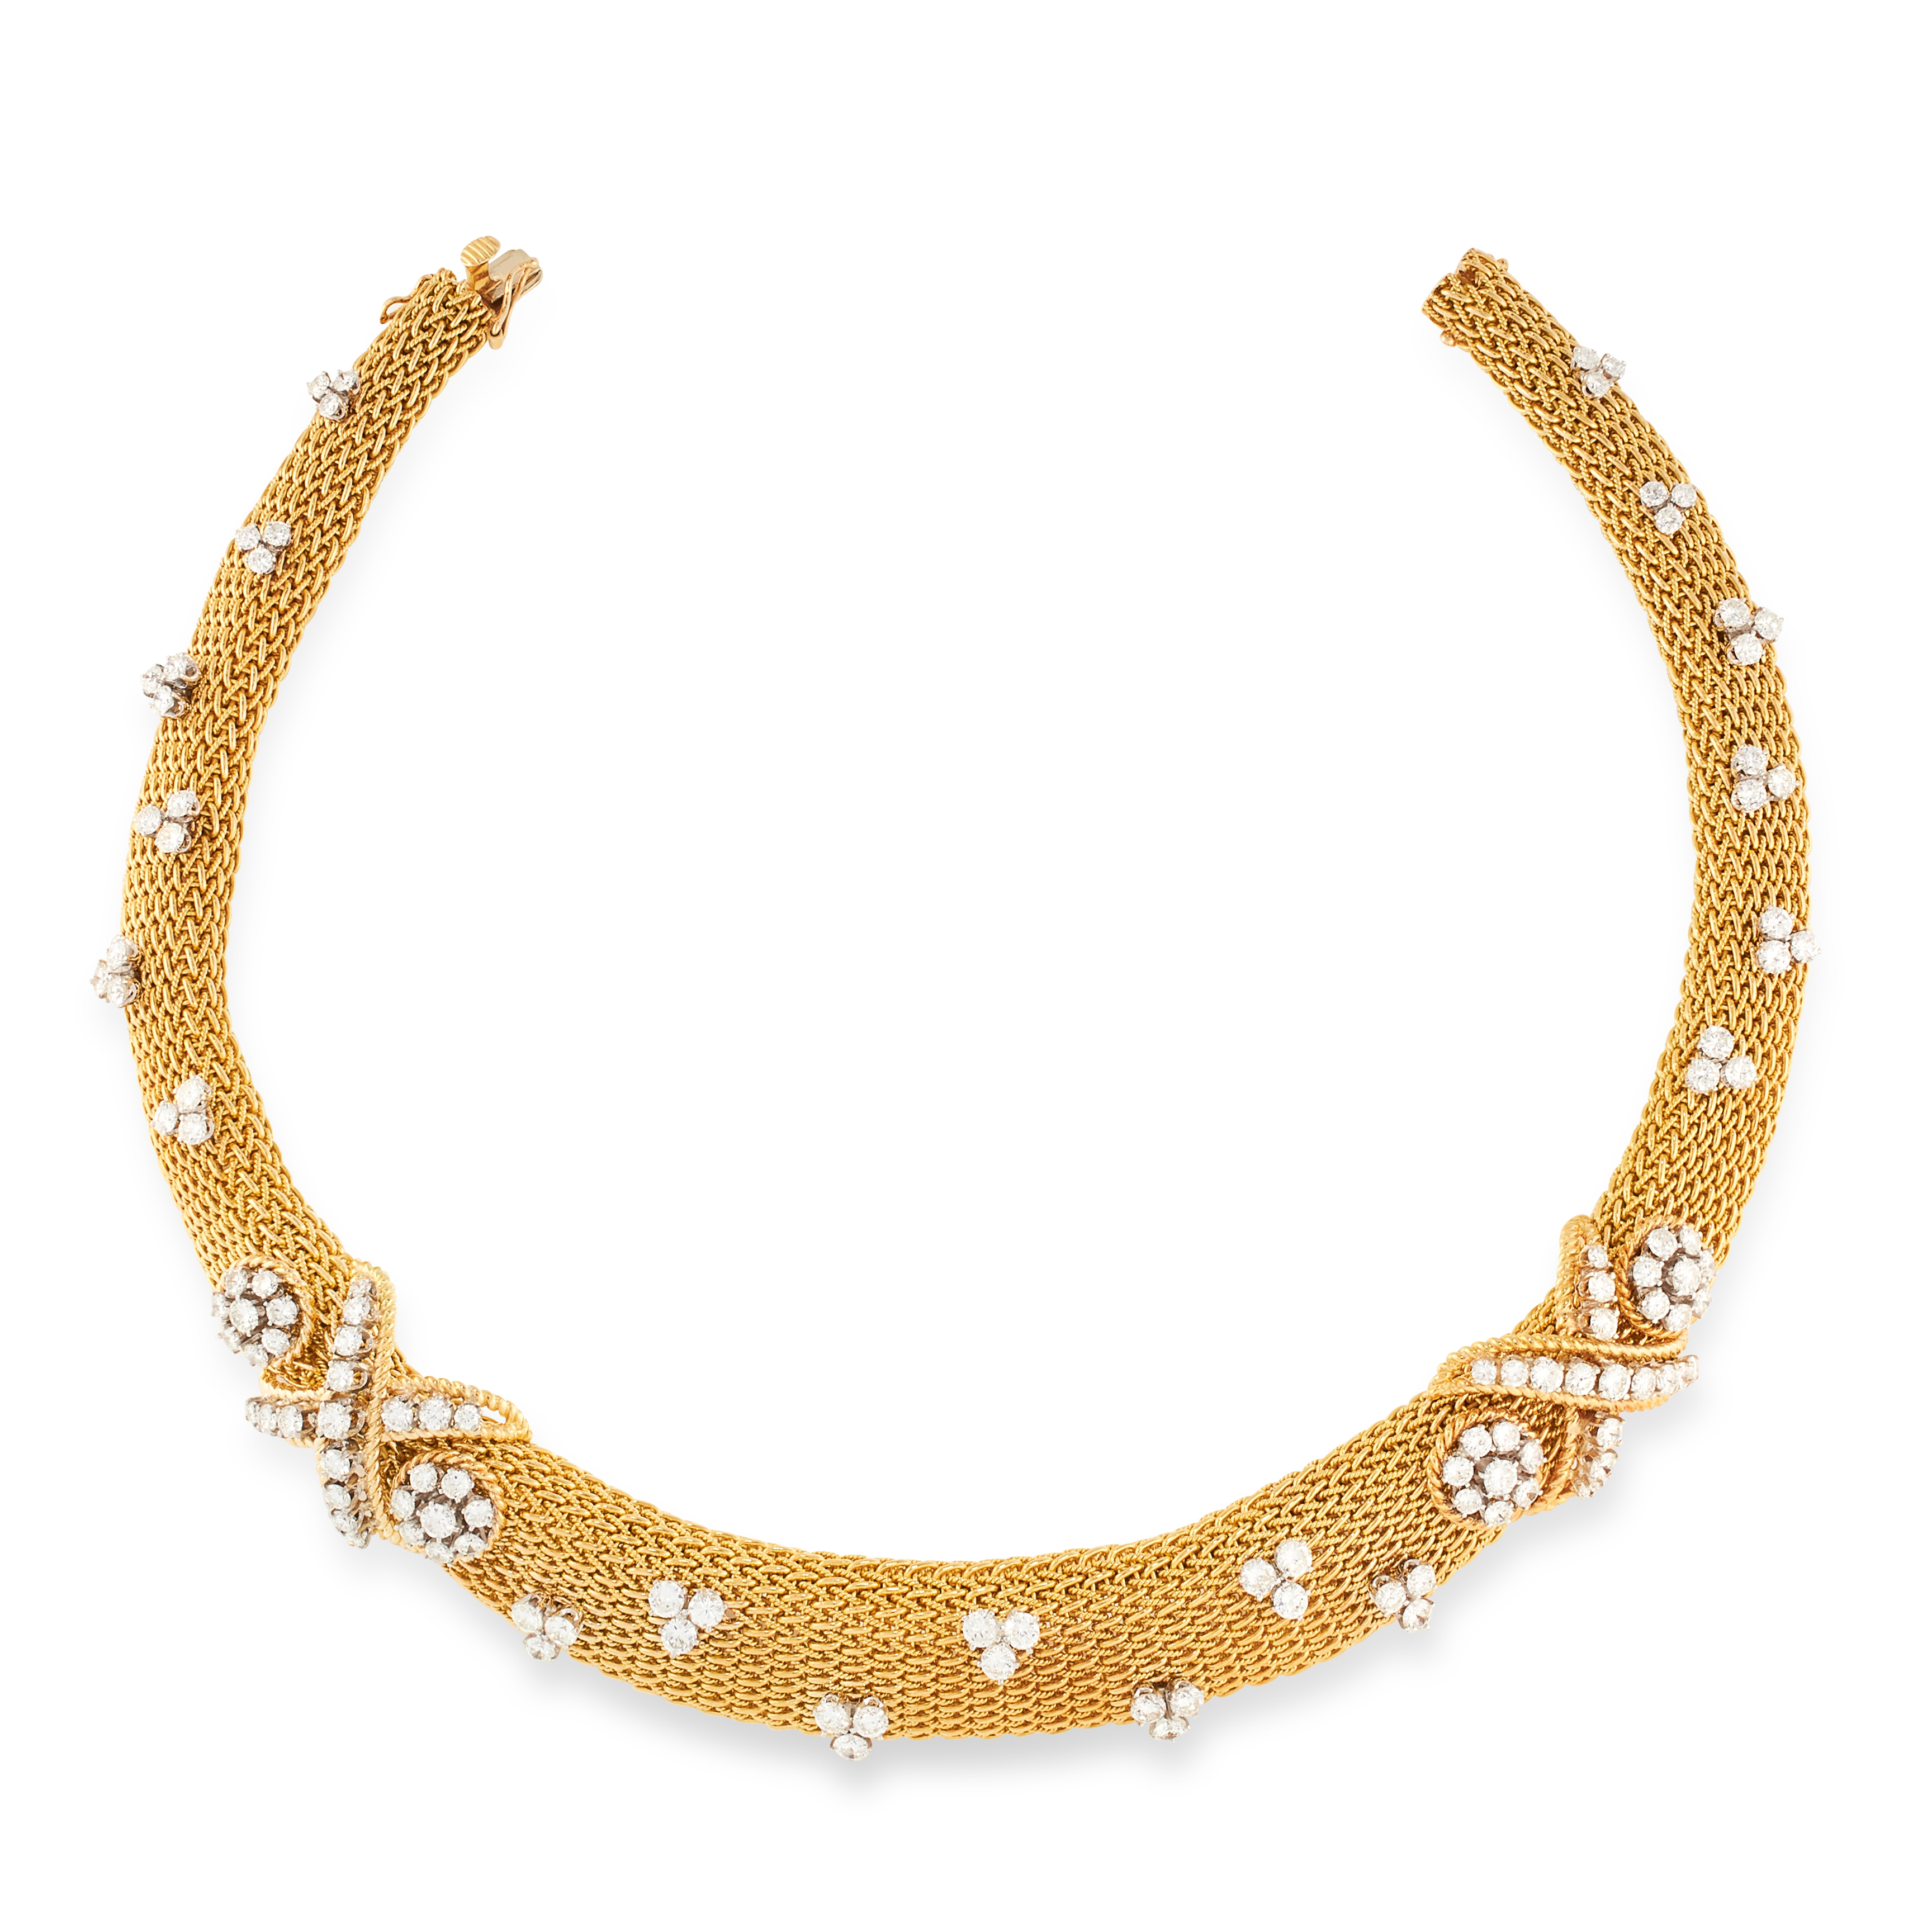 A VINTAGE DIAMOND NECKLACE in 18ct yellow gold, the tapering, articulated body formed of woven - Image 2 of 2